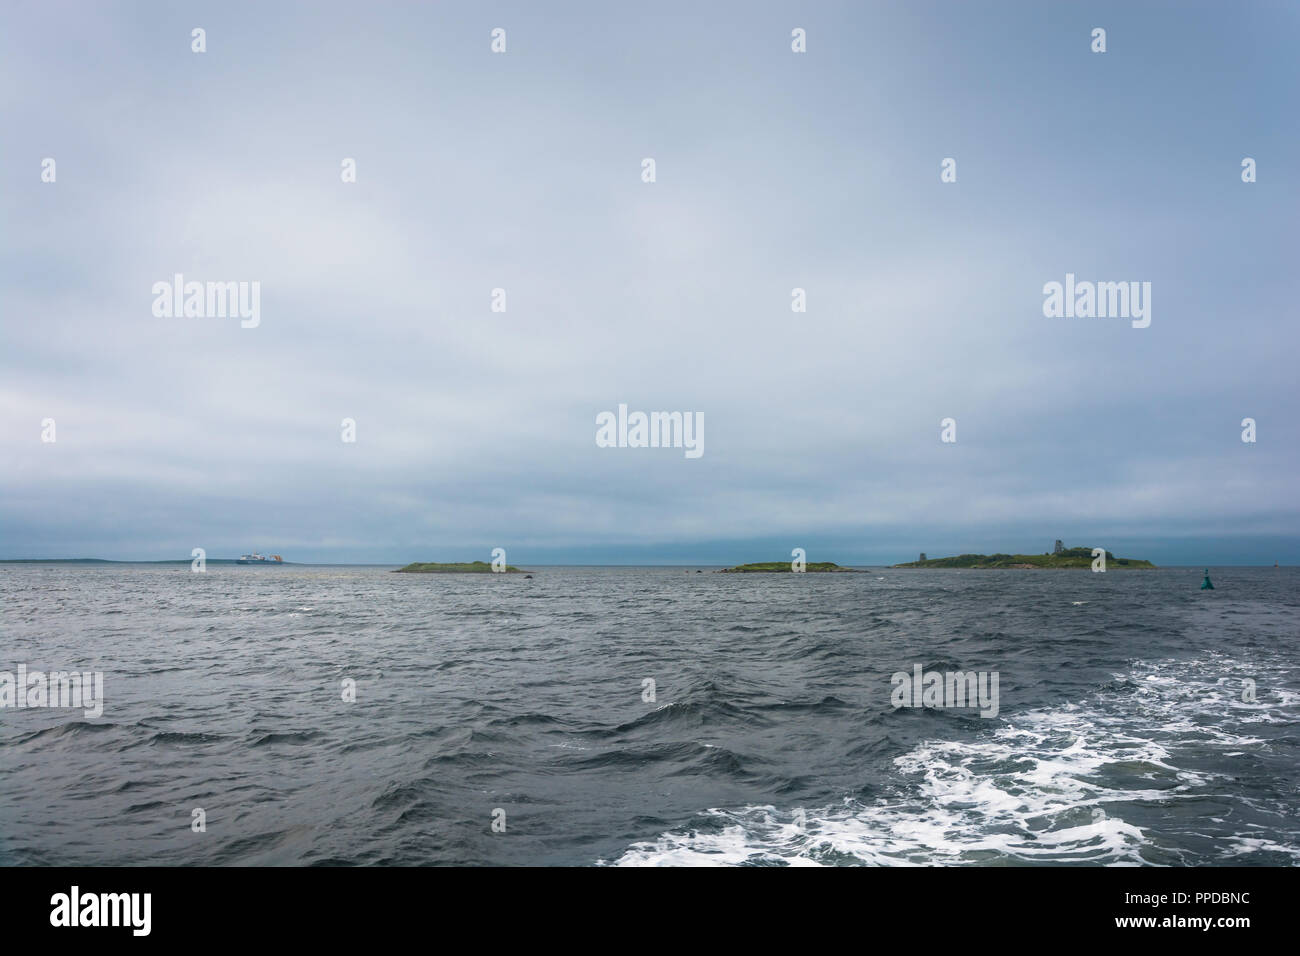 Small Islands at the approach to Solovki, Arkhangelsk oblast, Russia. Stock Photo